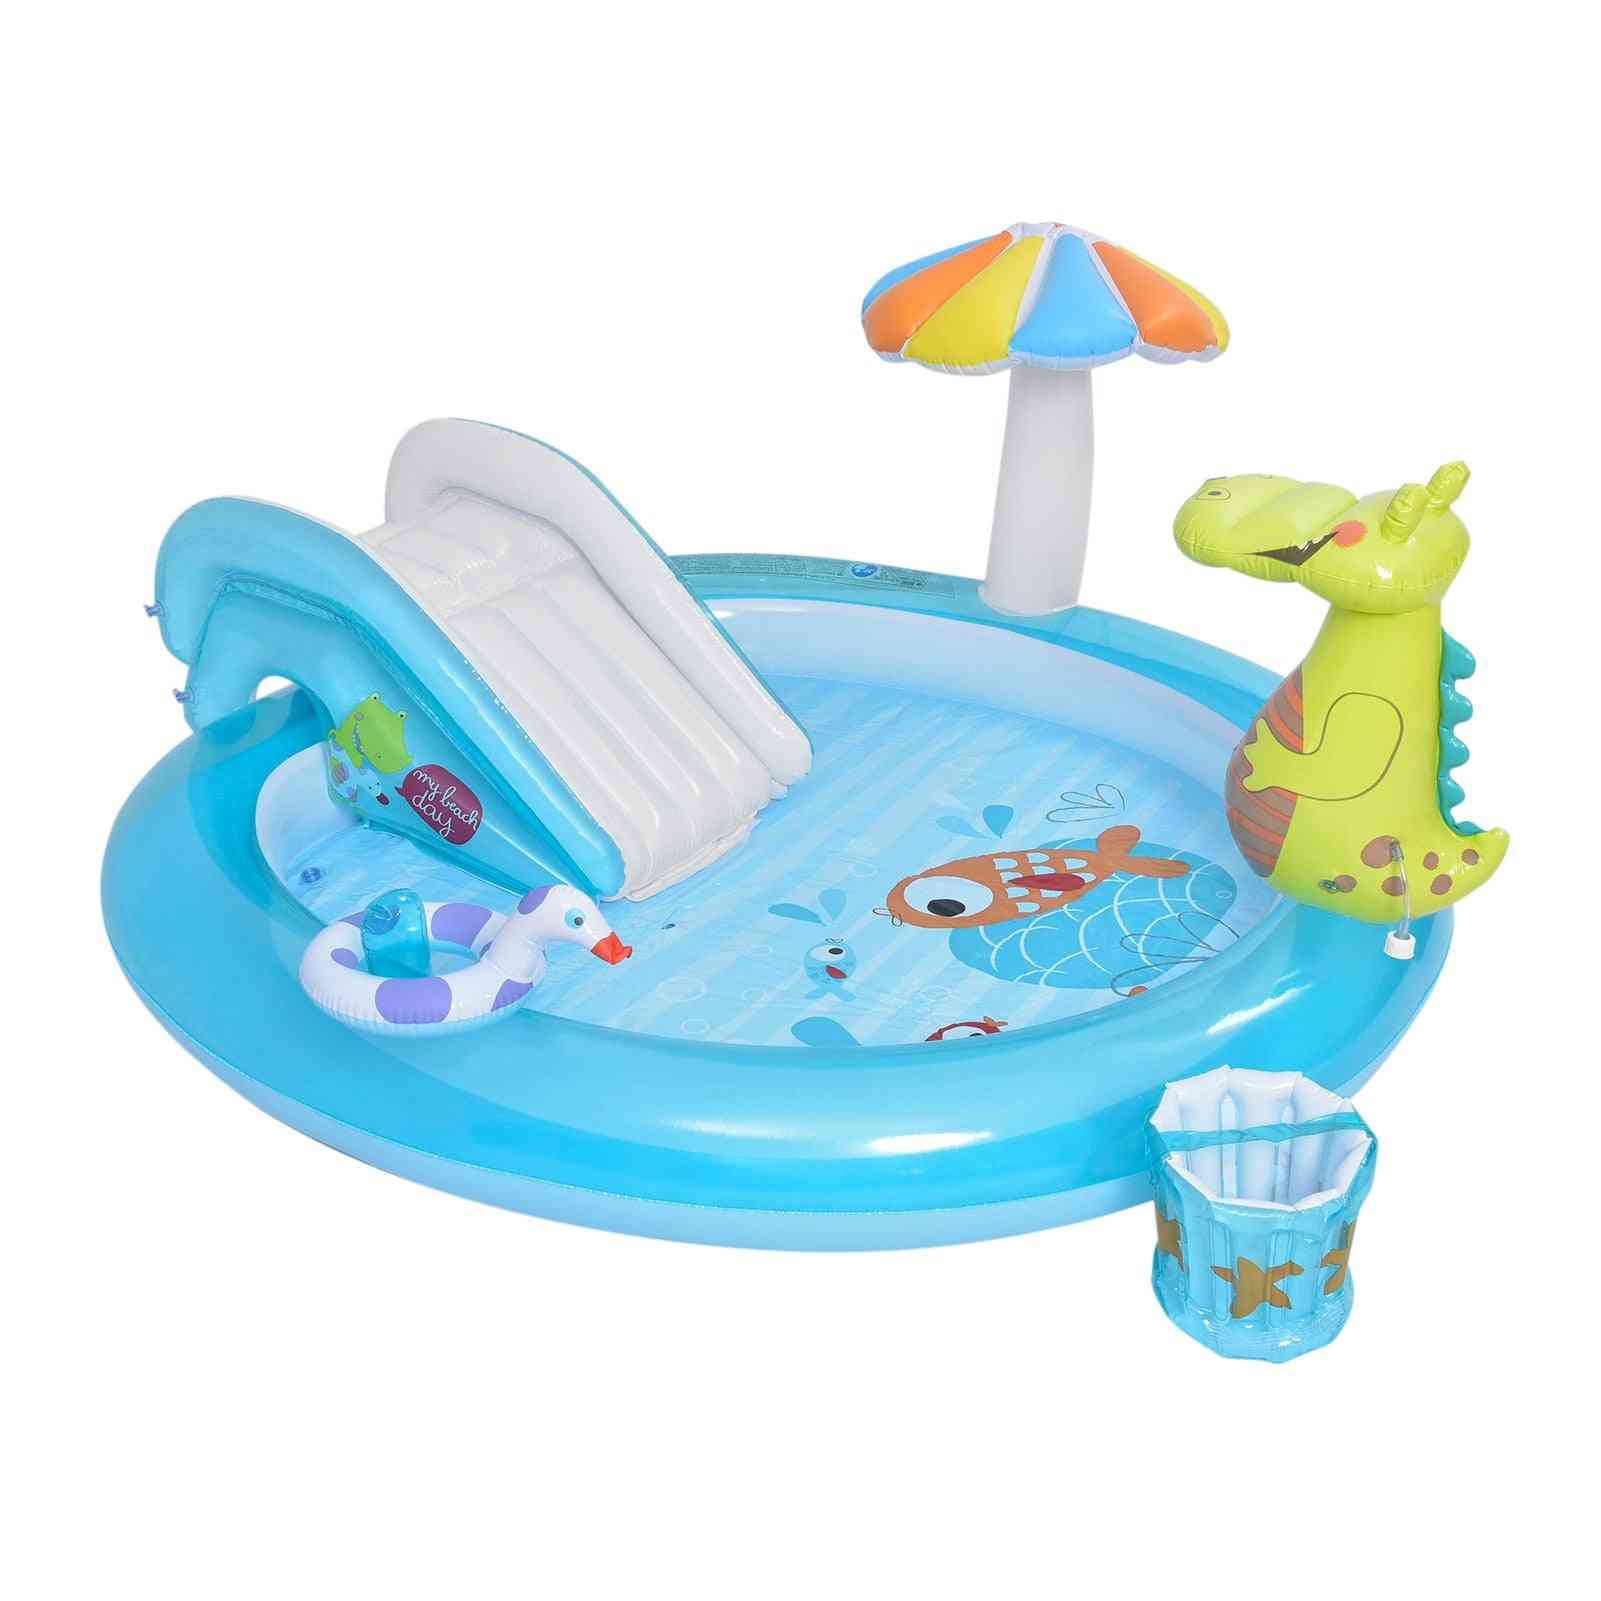 Inflatable- Play Center, Blow-up Swimming, Water Fun Pool